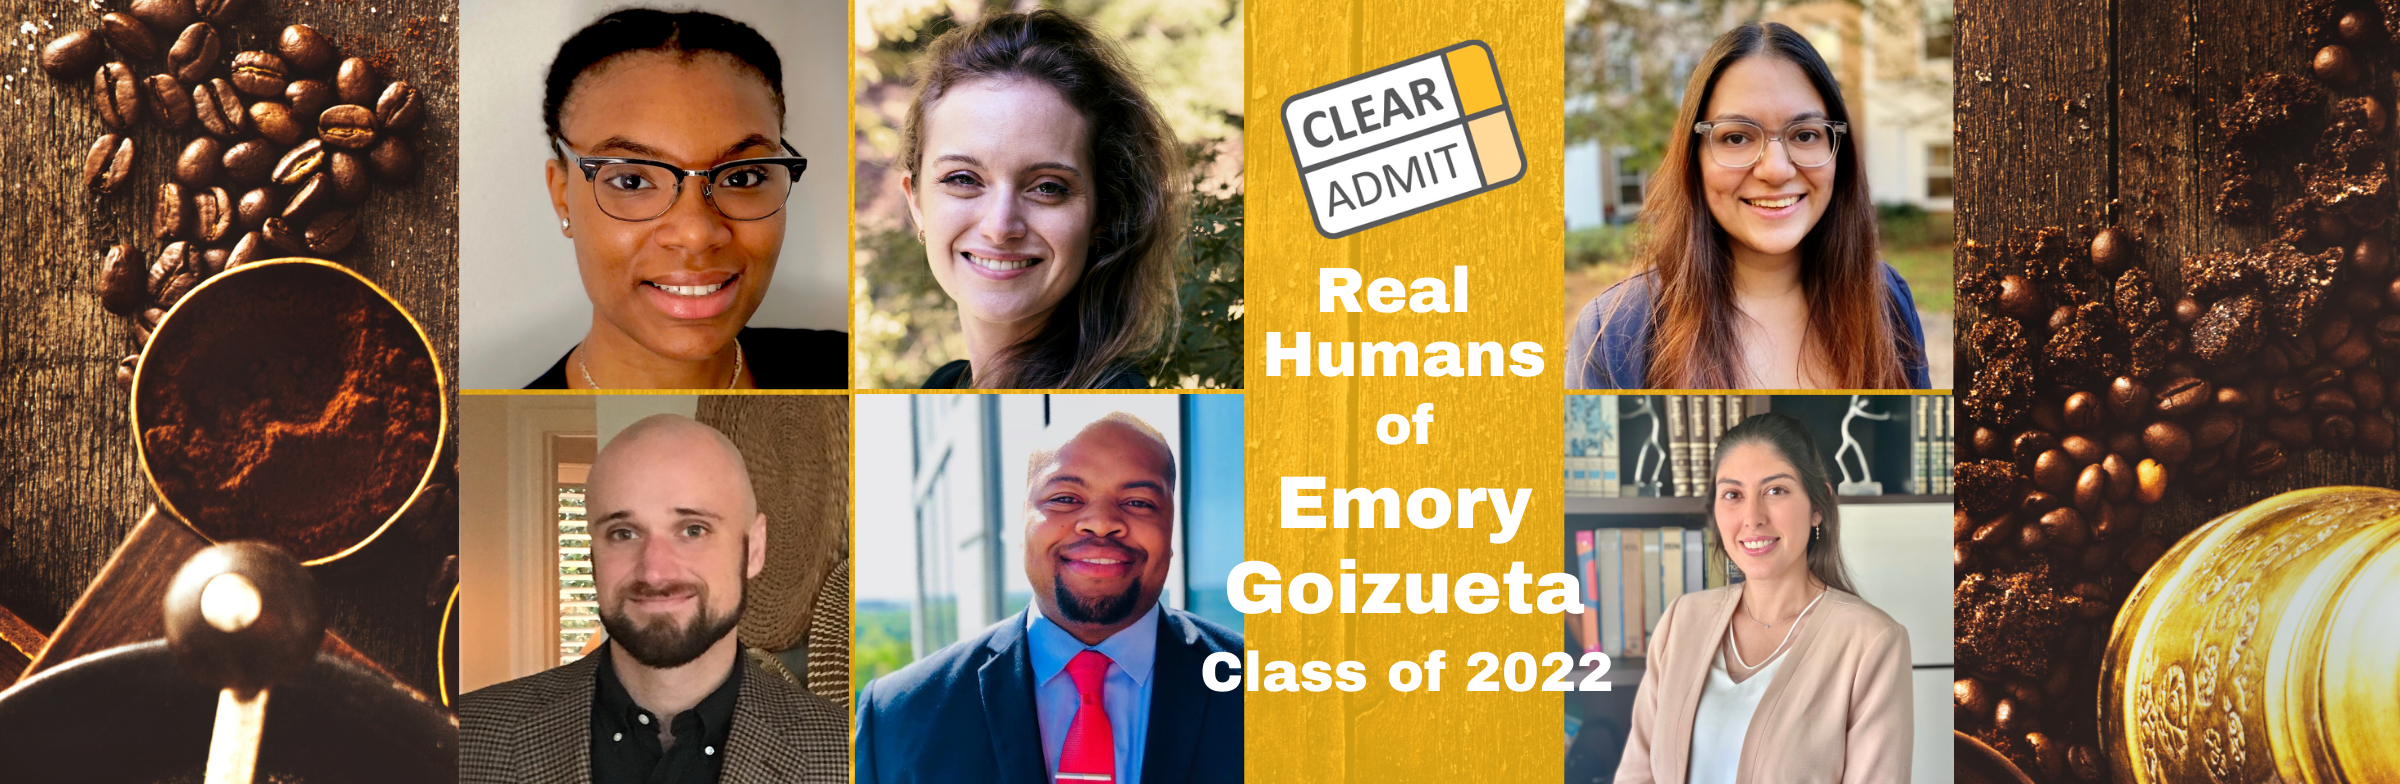 Image for Real Humans of Emory Goizueta’s MBA Class of 2022